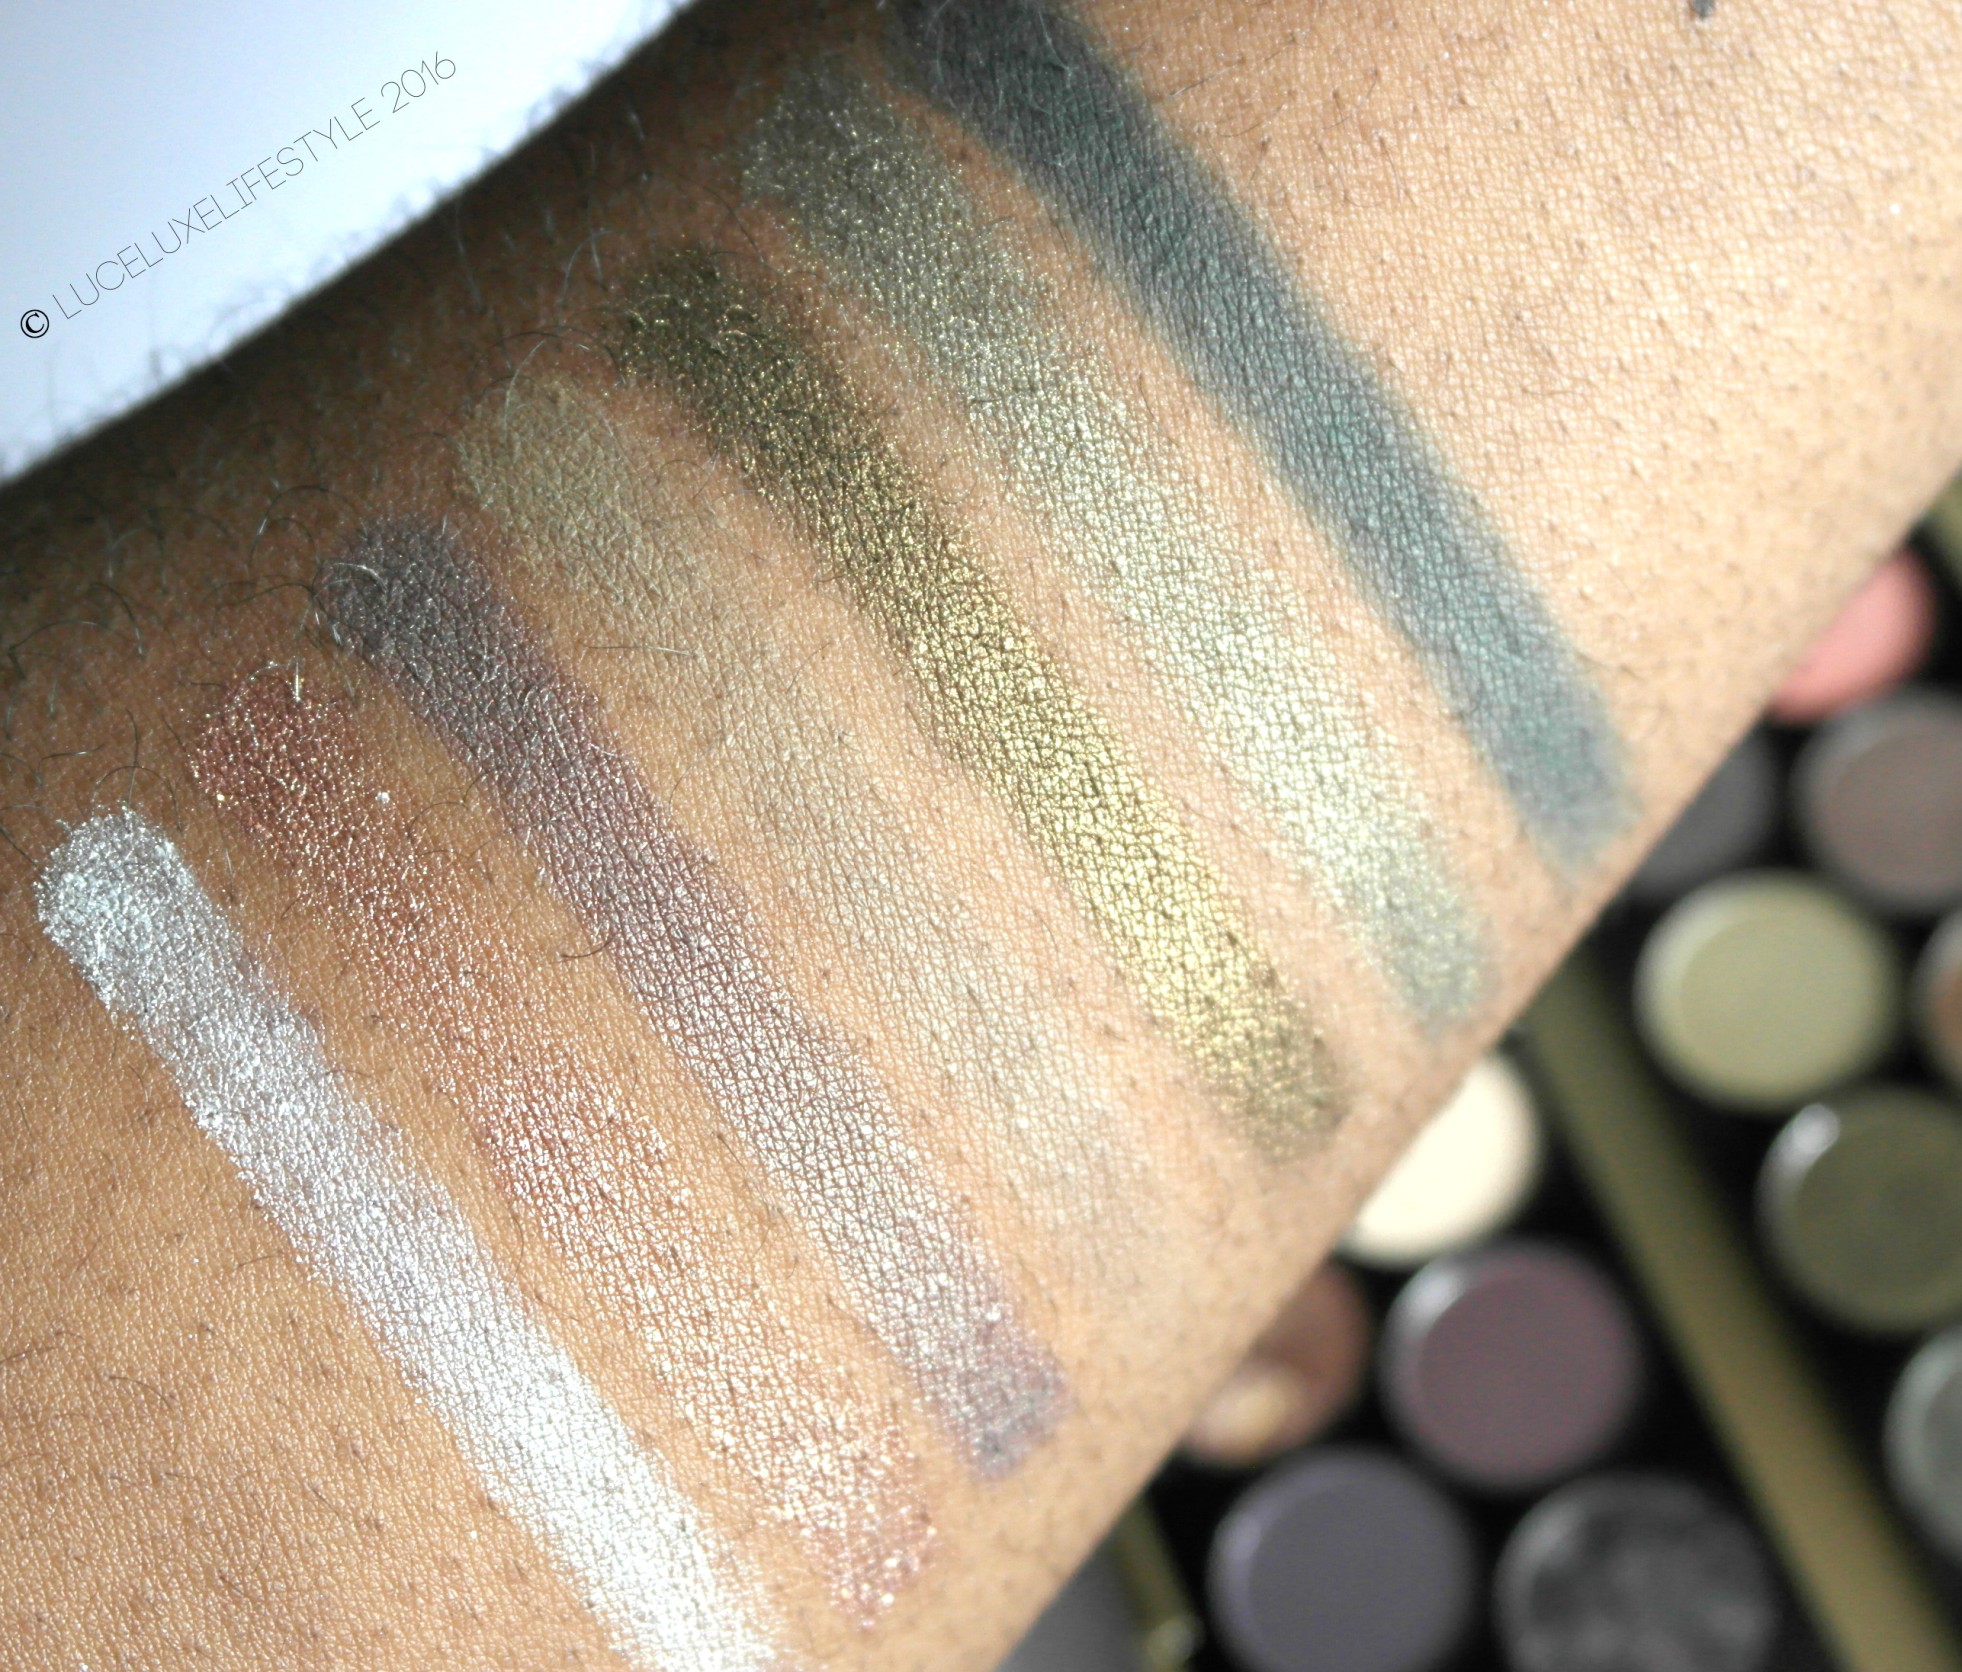 fortune favours the brave makeup revolution swatch 2.jpg